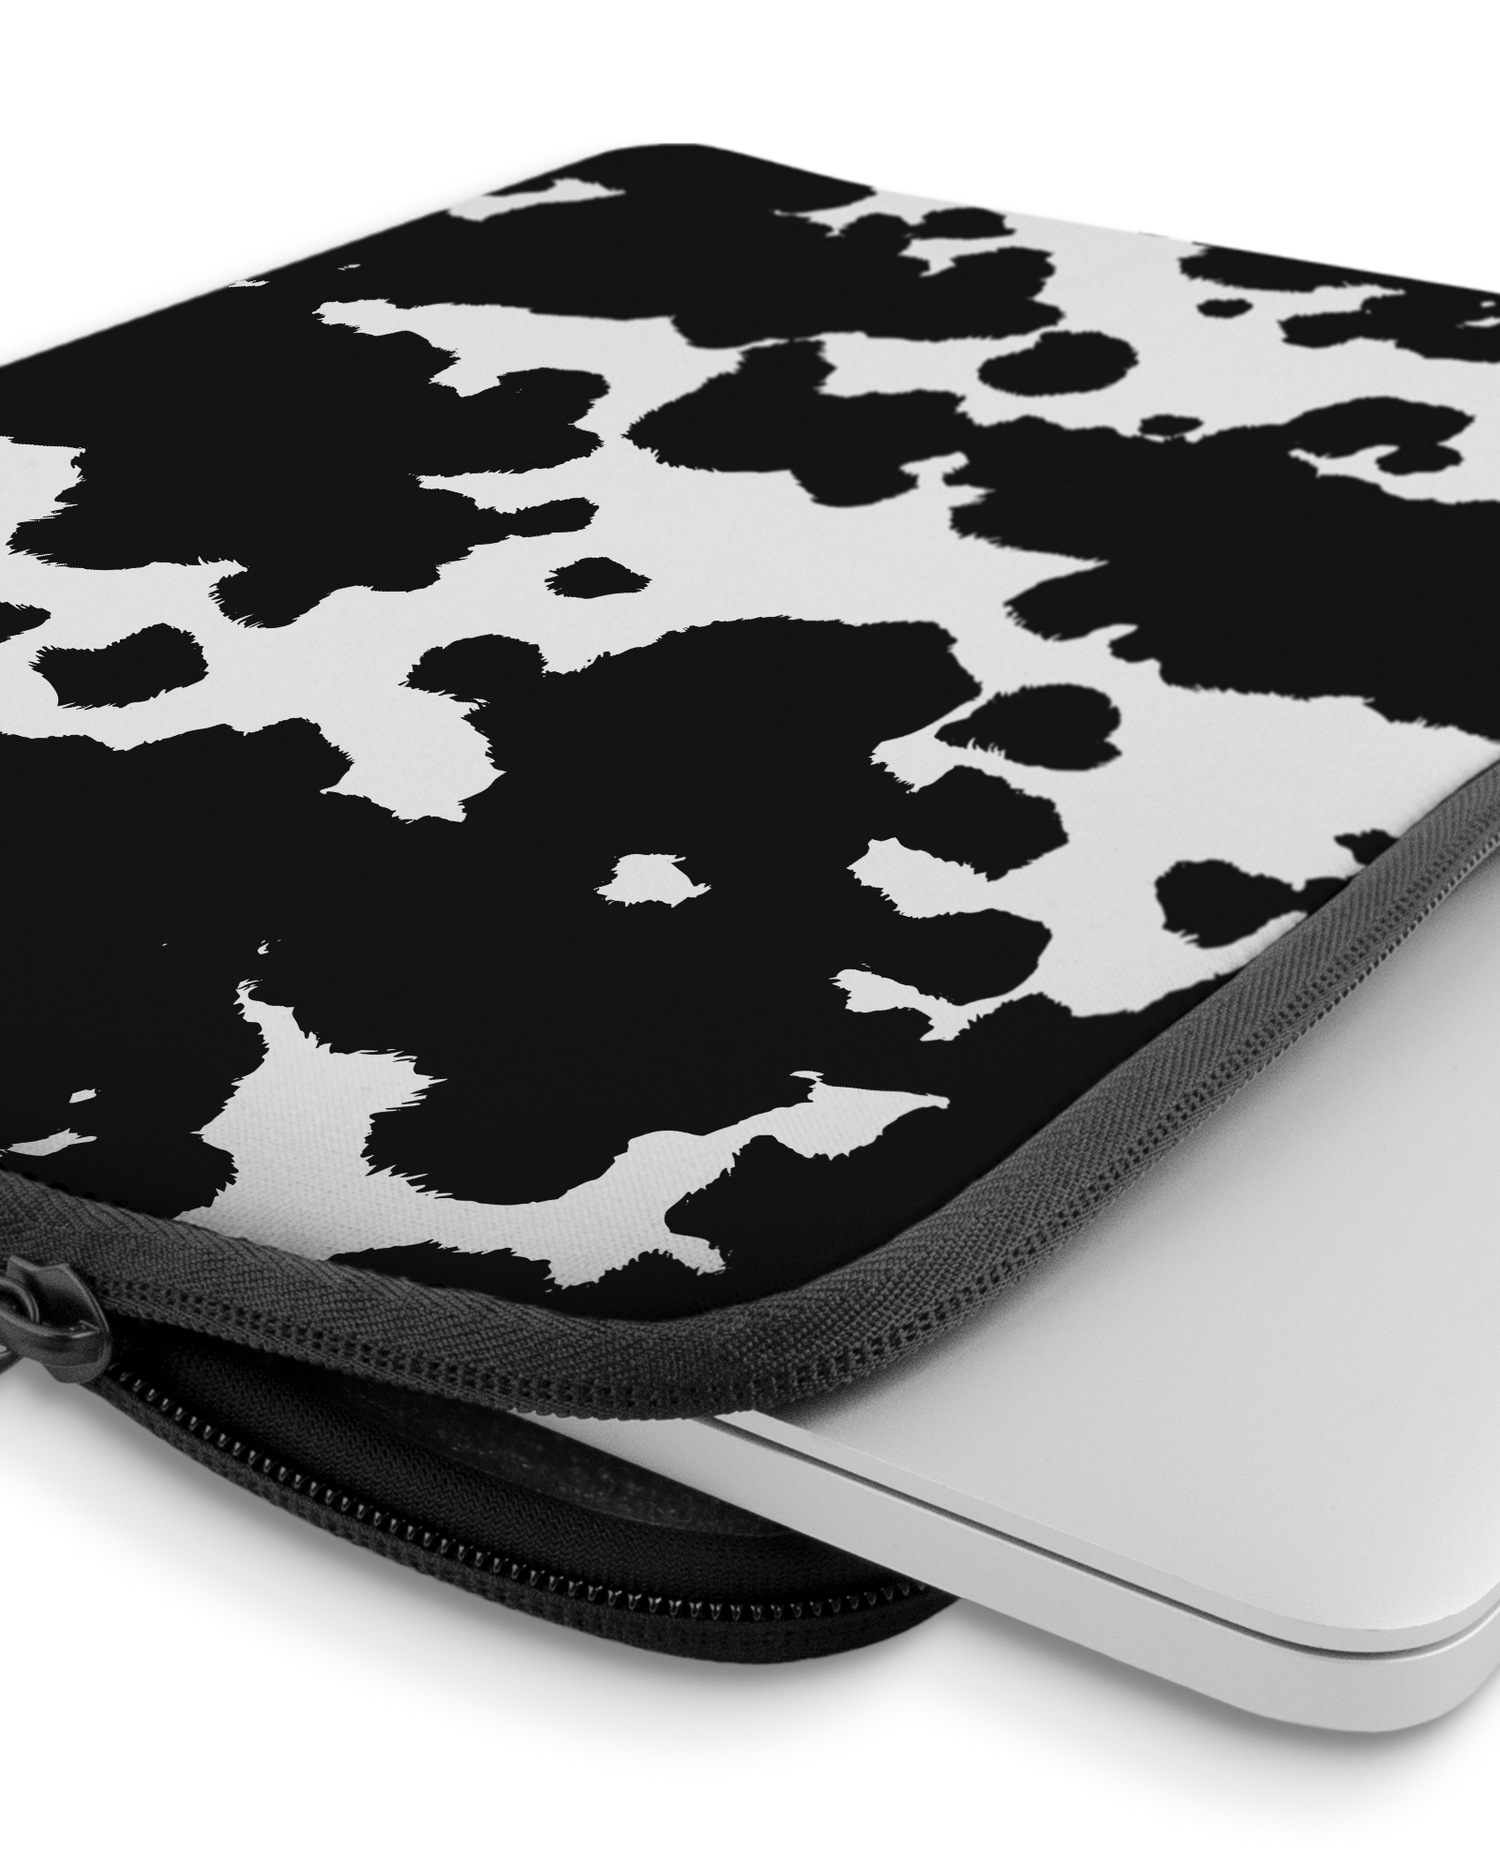 Cow Print Laptop Case 13-14 inch with device inside